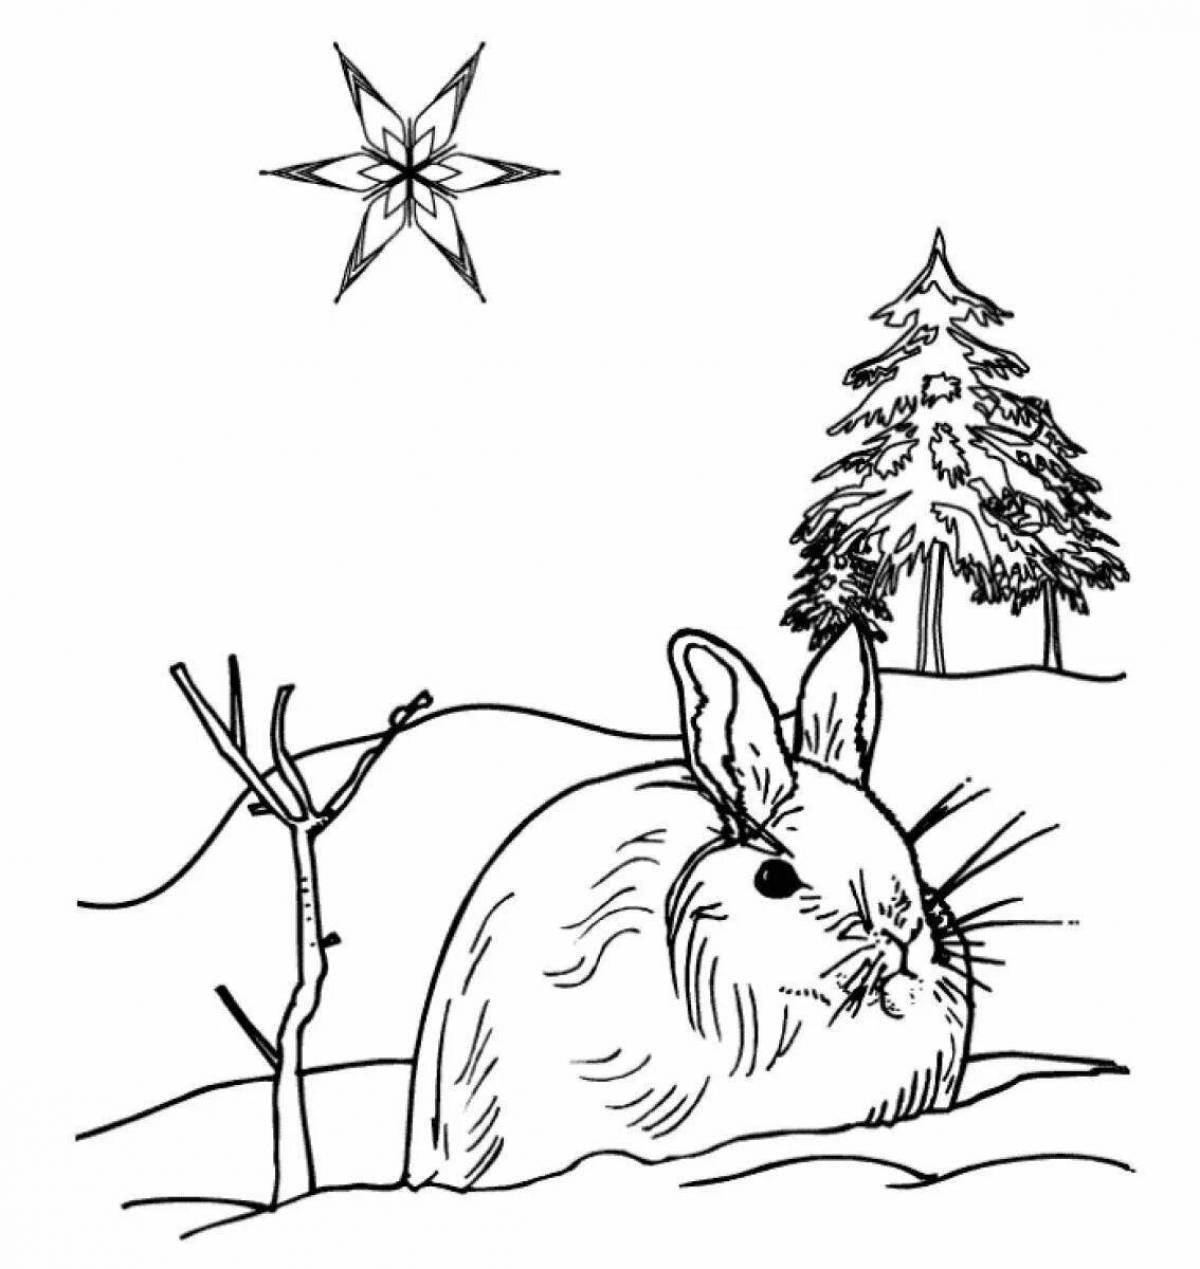 Coloring page serendipitous winter in the forest